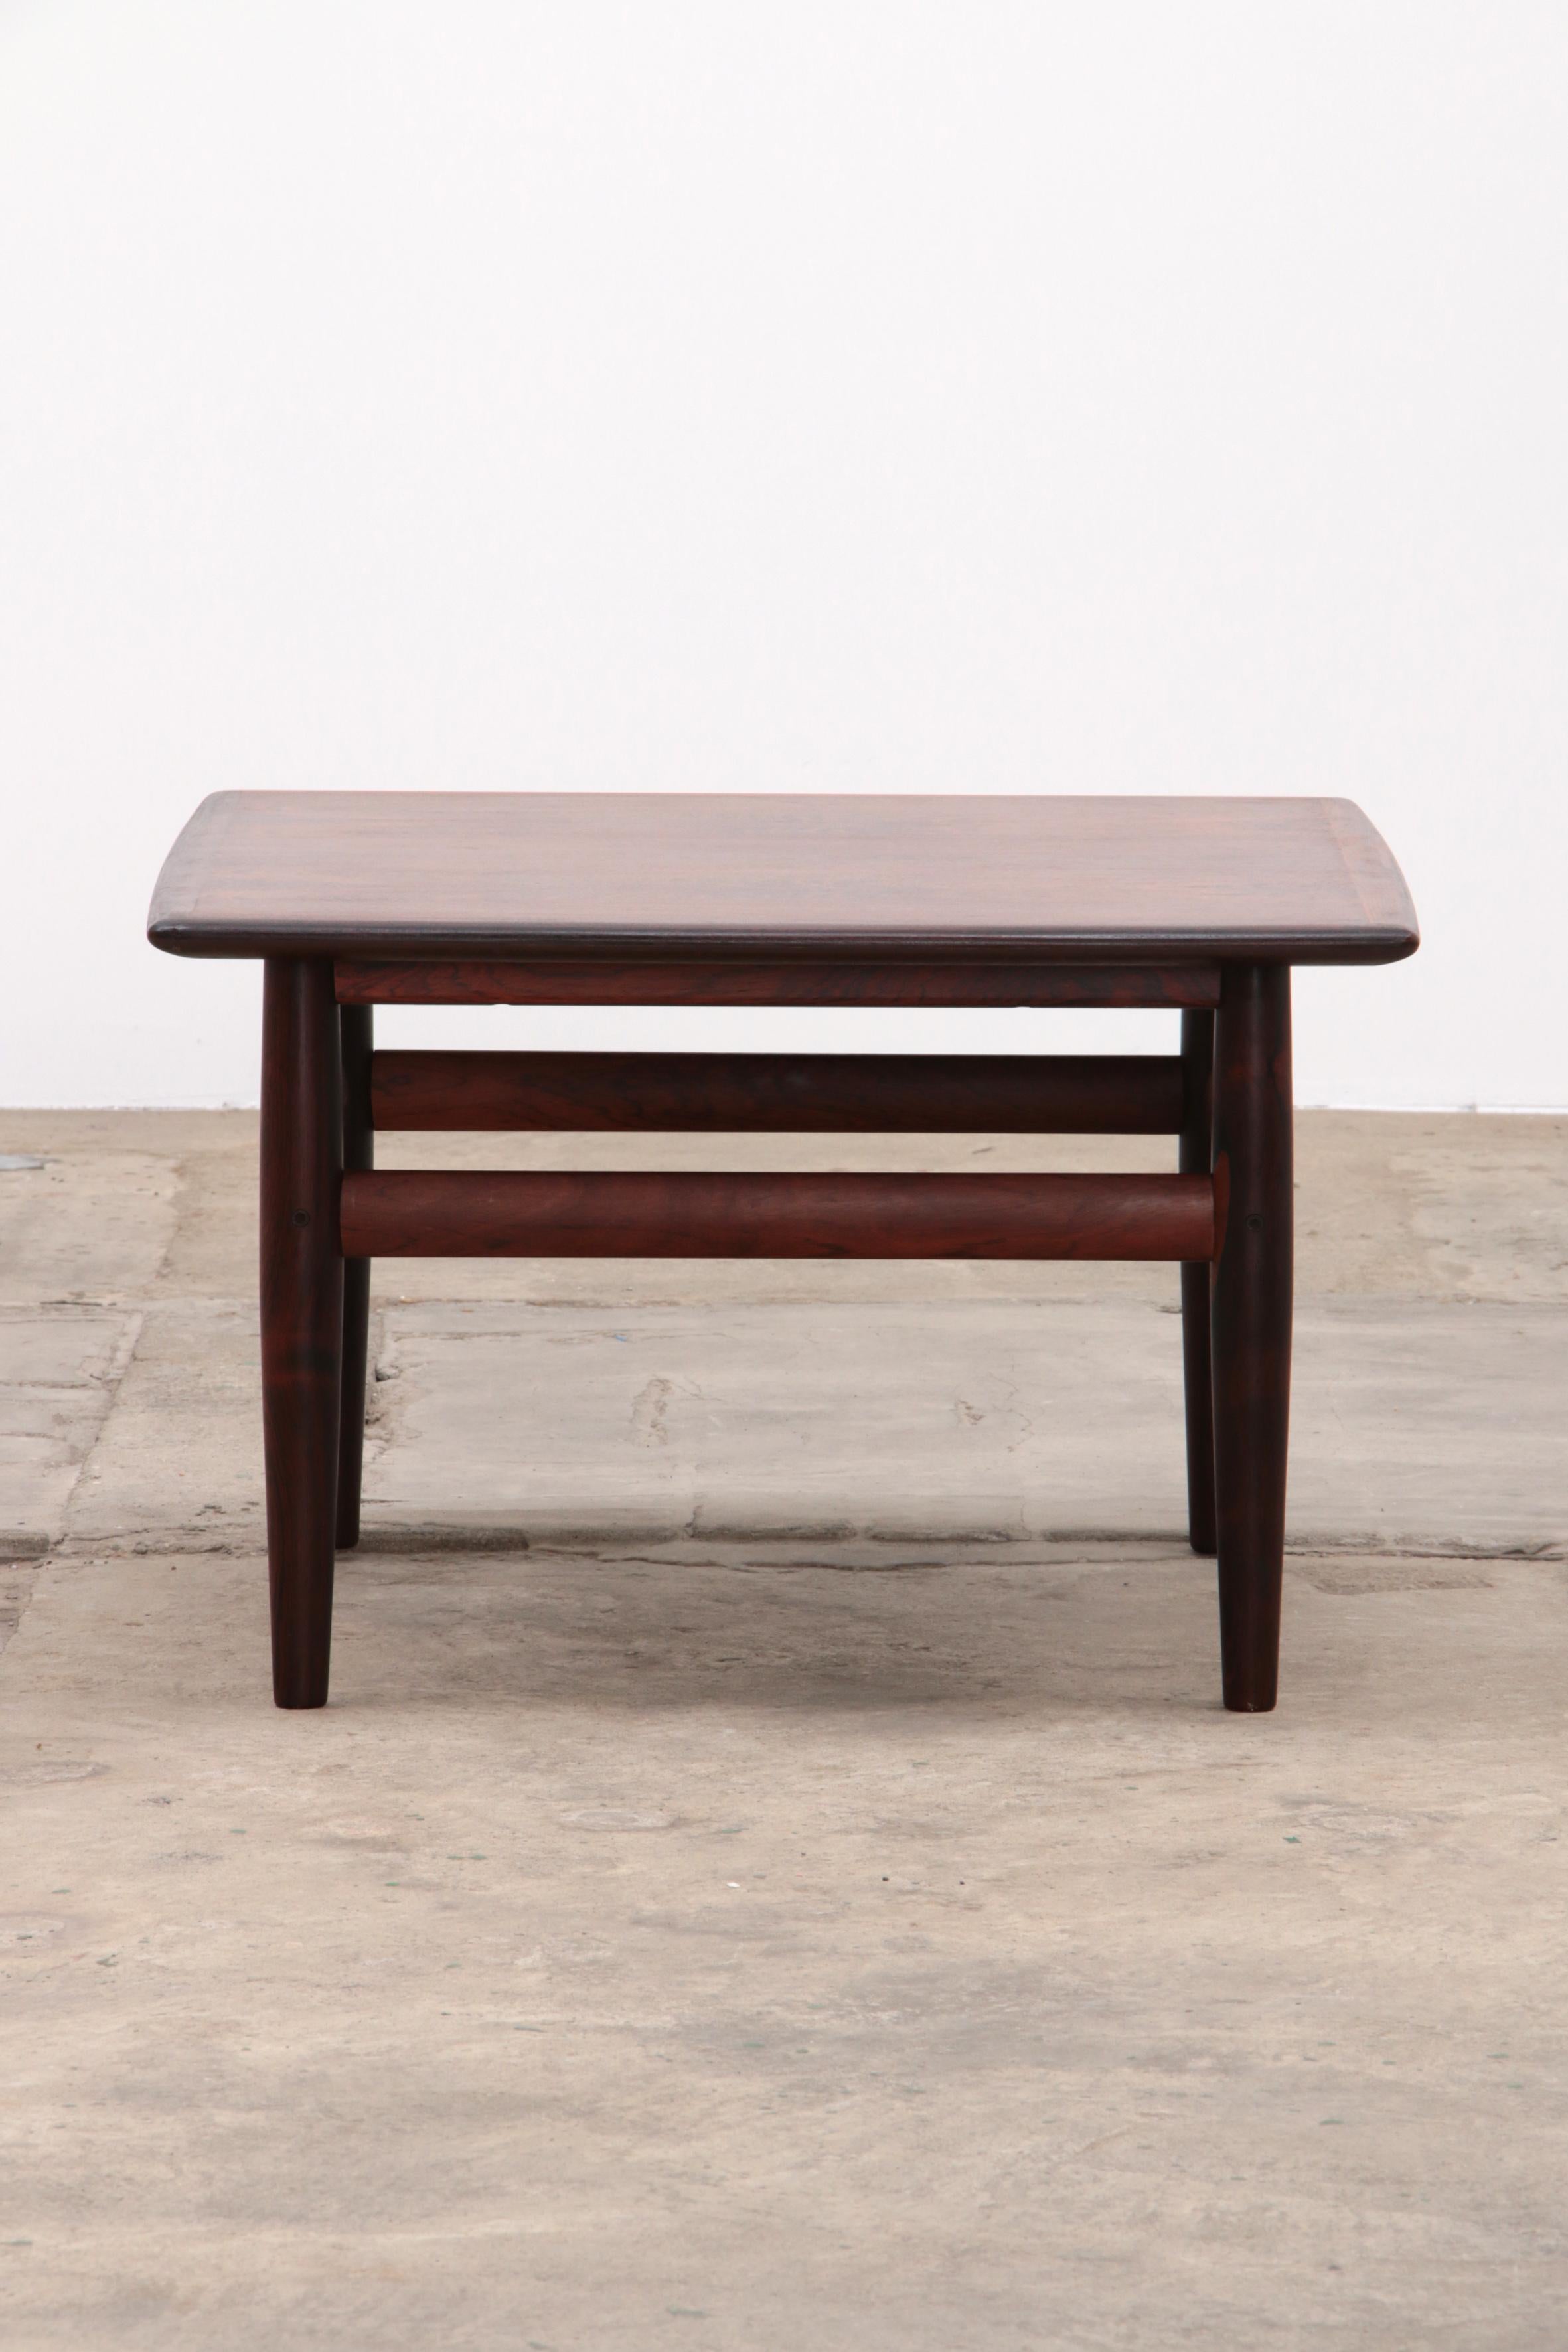 Wood Rosewood Coffee Table by Grete Jalk for Glostrup, 1968 Denmark. For Sale